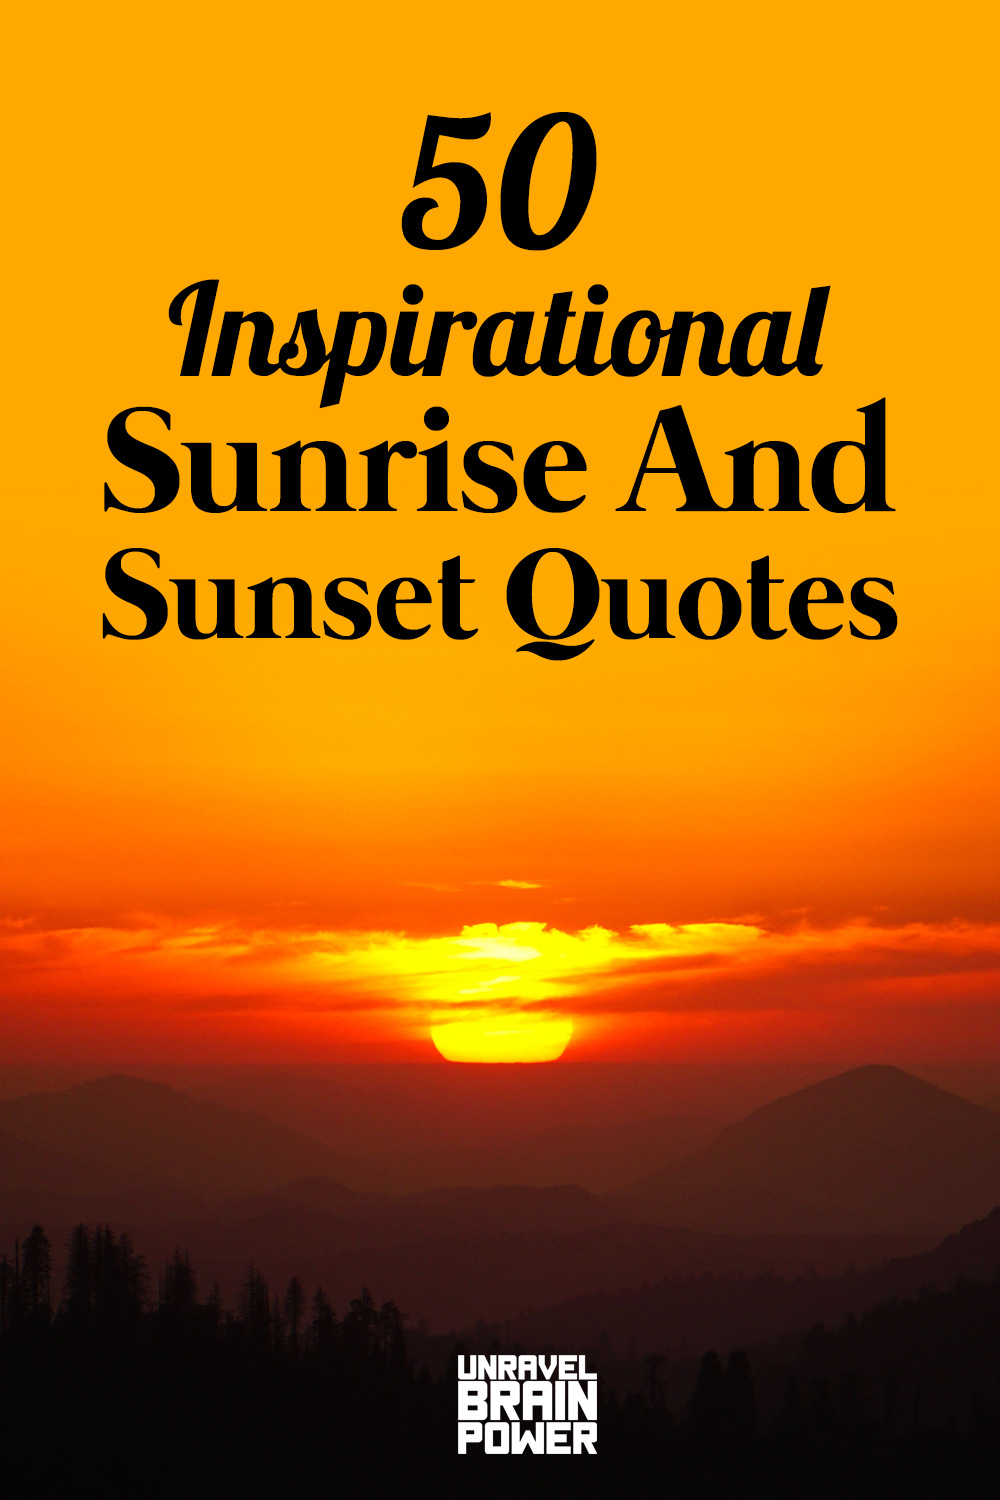 50 Inspirational Sunrise And Sunset Quotes - Unravel Brain Power